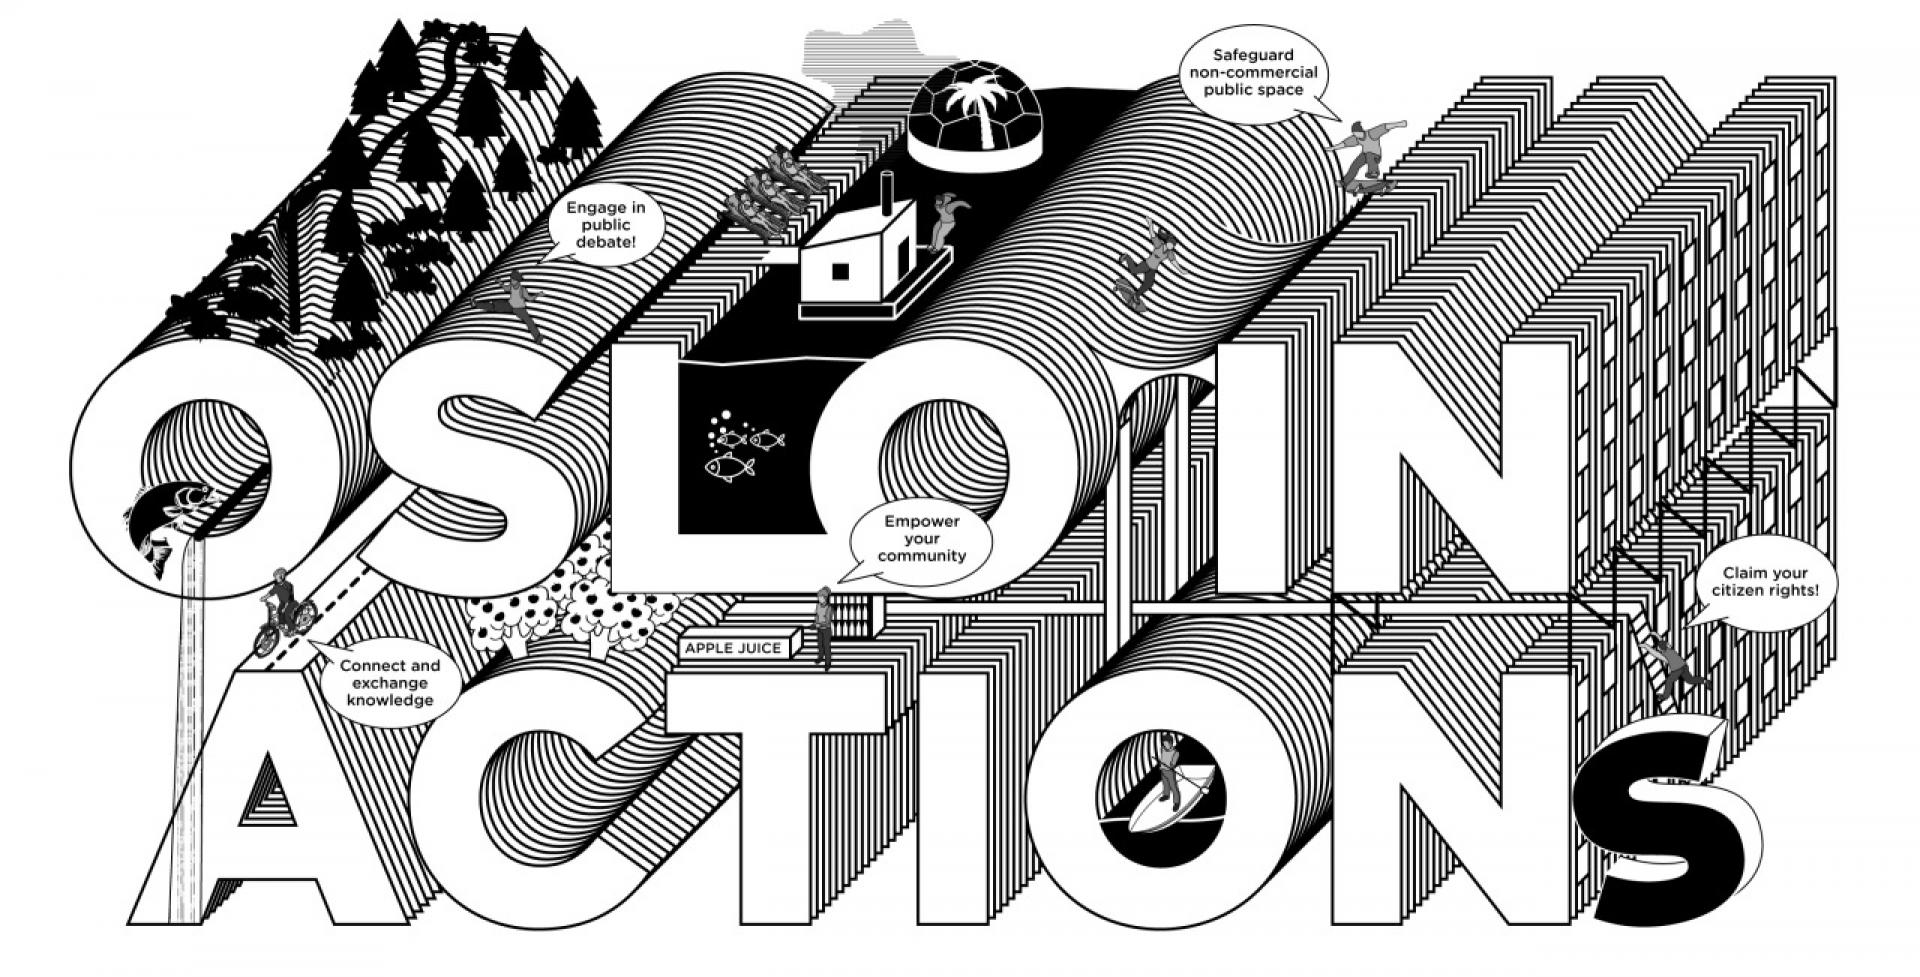 Oslo In Action(s) is a research project uncovering city-makers who stimulate and nurture the commons beyond the boundaries of professional practice.